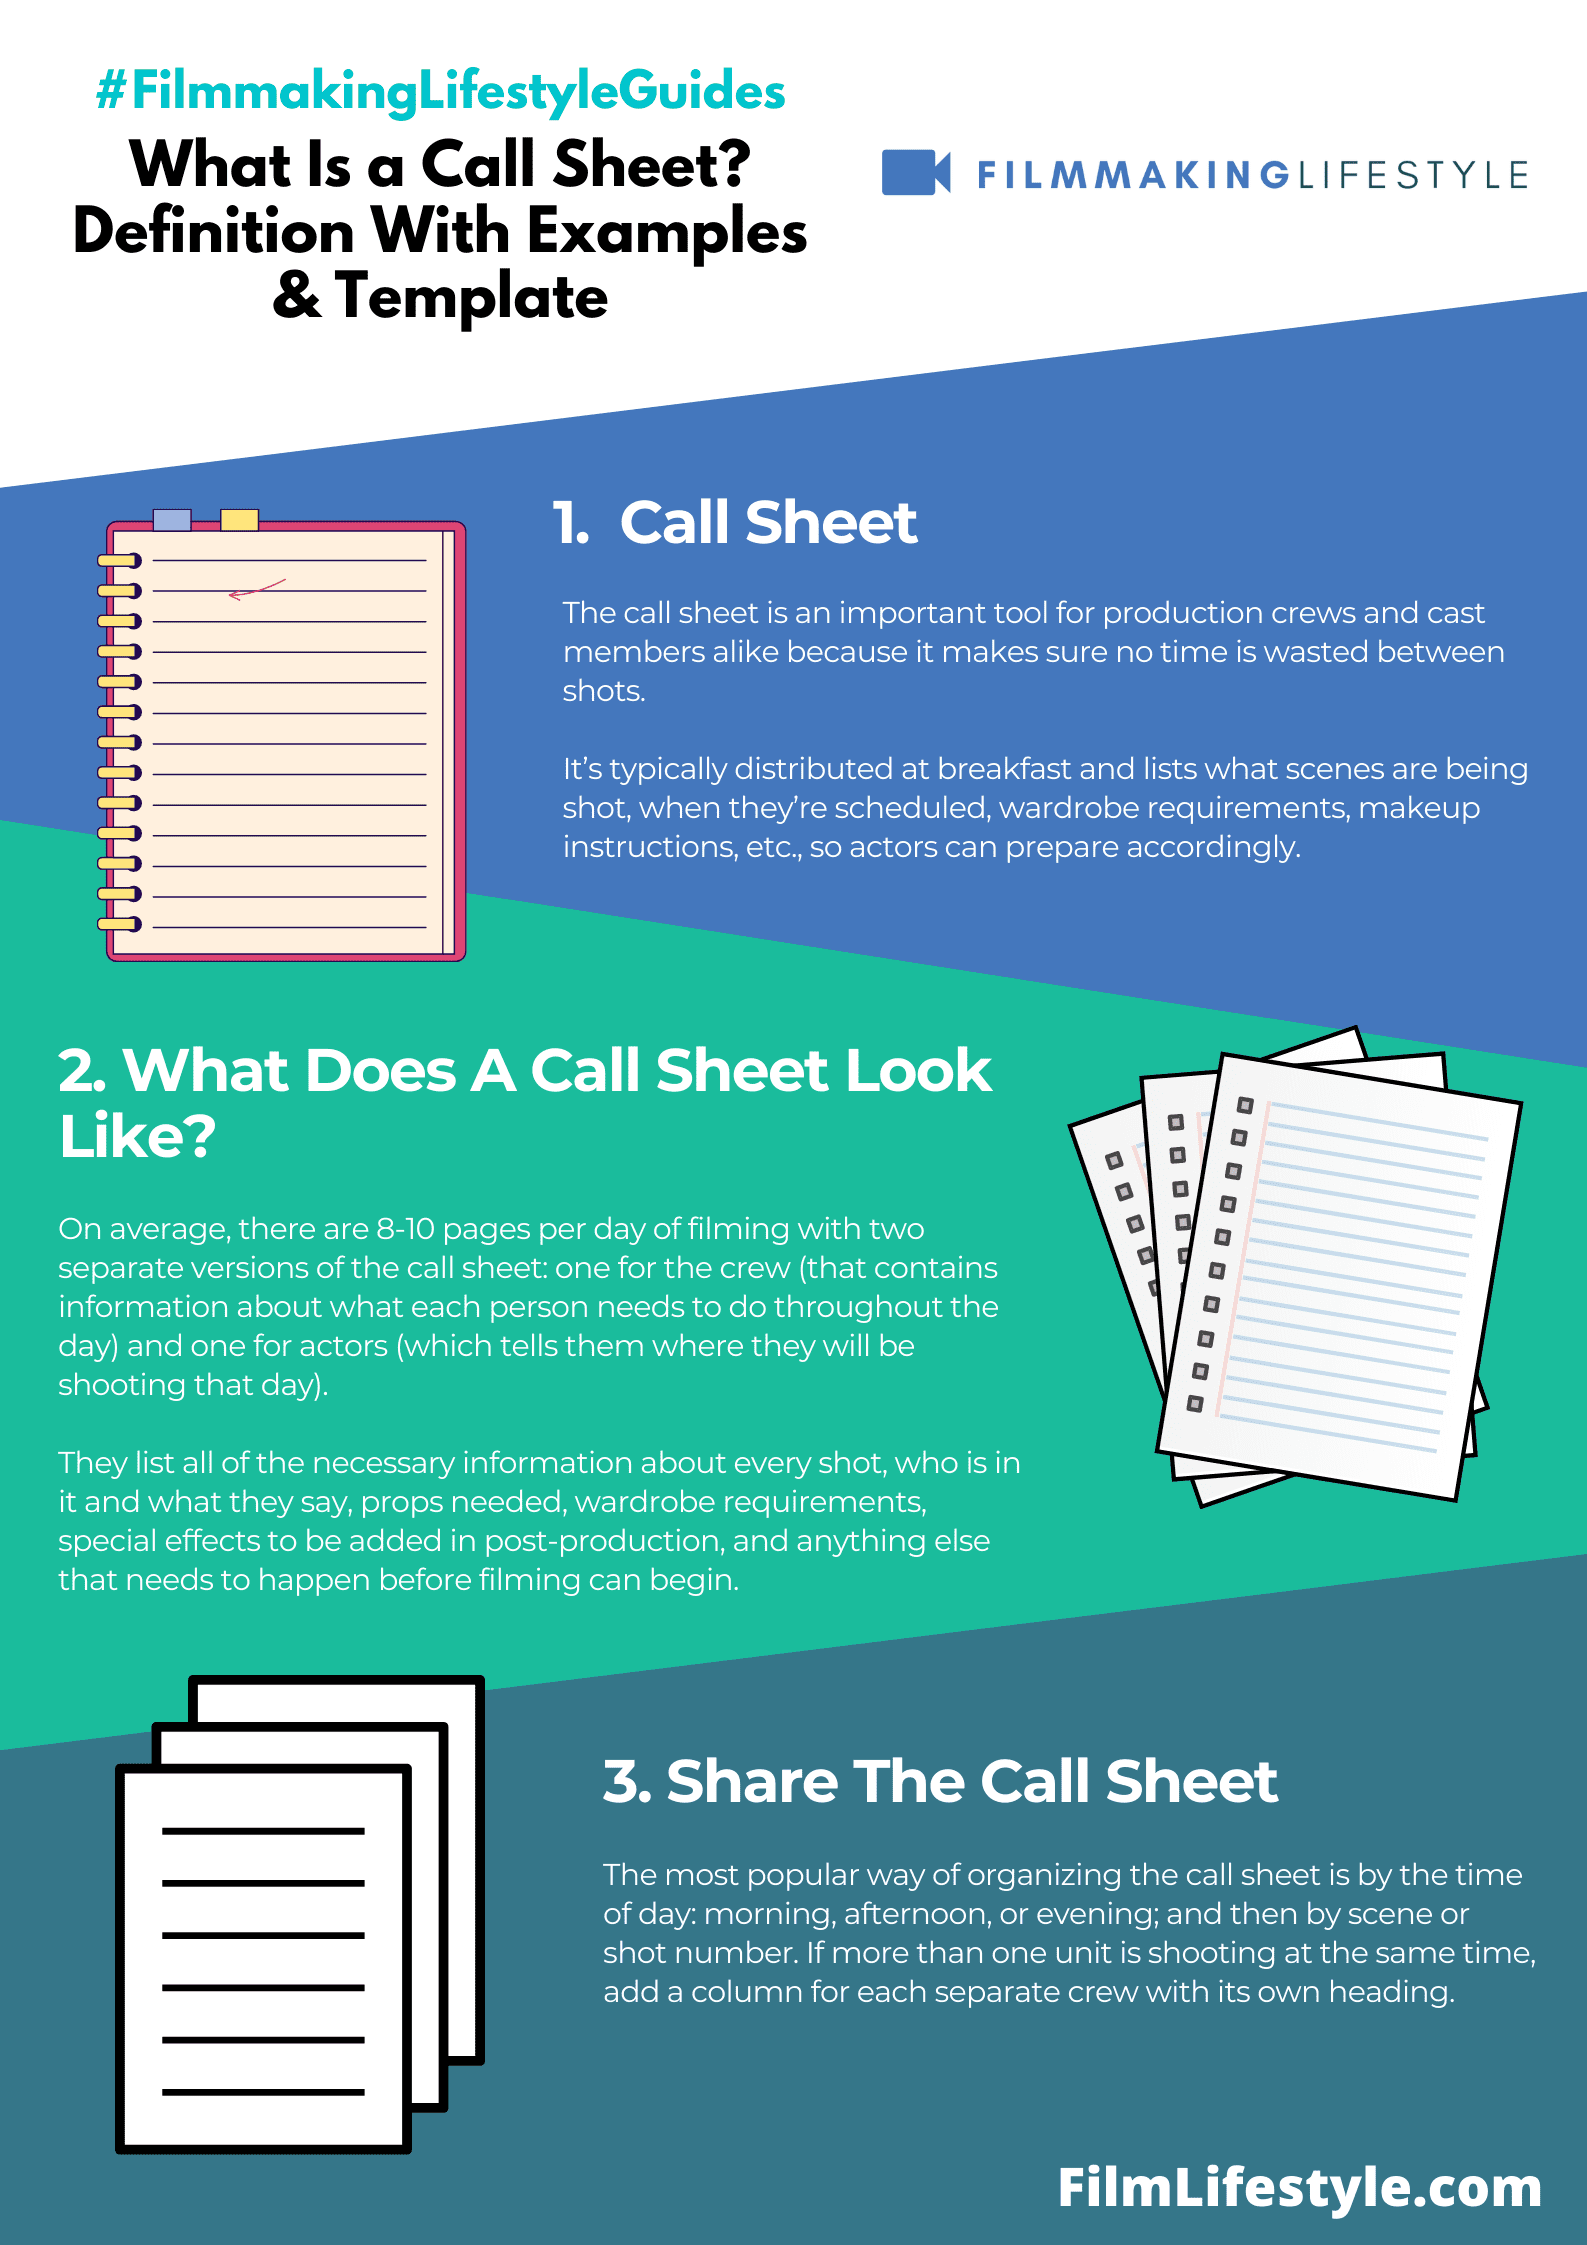 What Is a Call Sheet